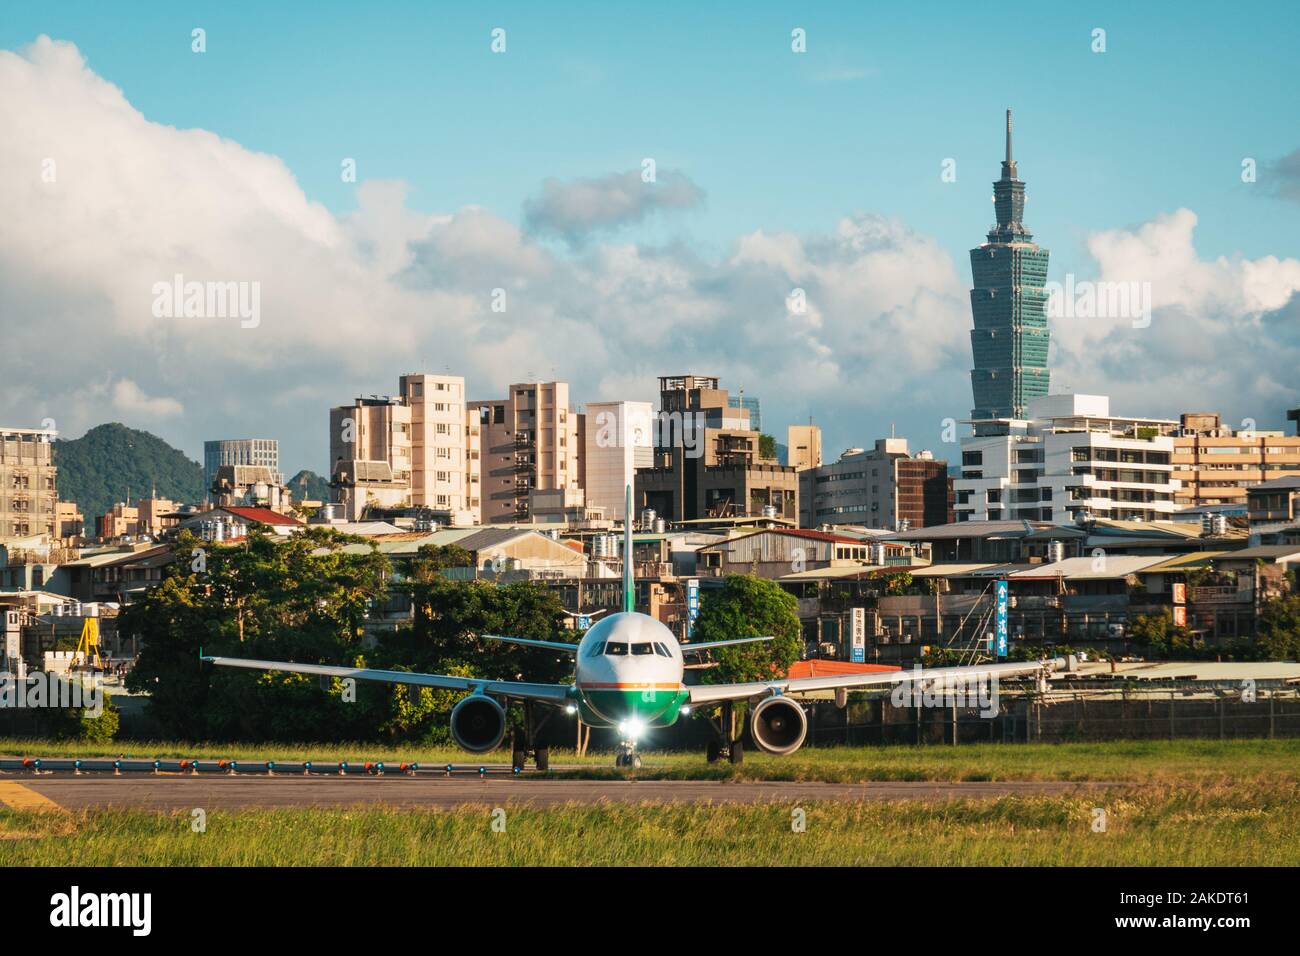 An EVA Air Airbus A321 lines up for takeoff on a sunny evening at Taipei's Songshan Airport. The Taipei 101 skyscraper is visible behind Stock Photo